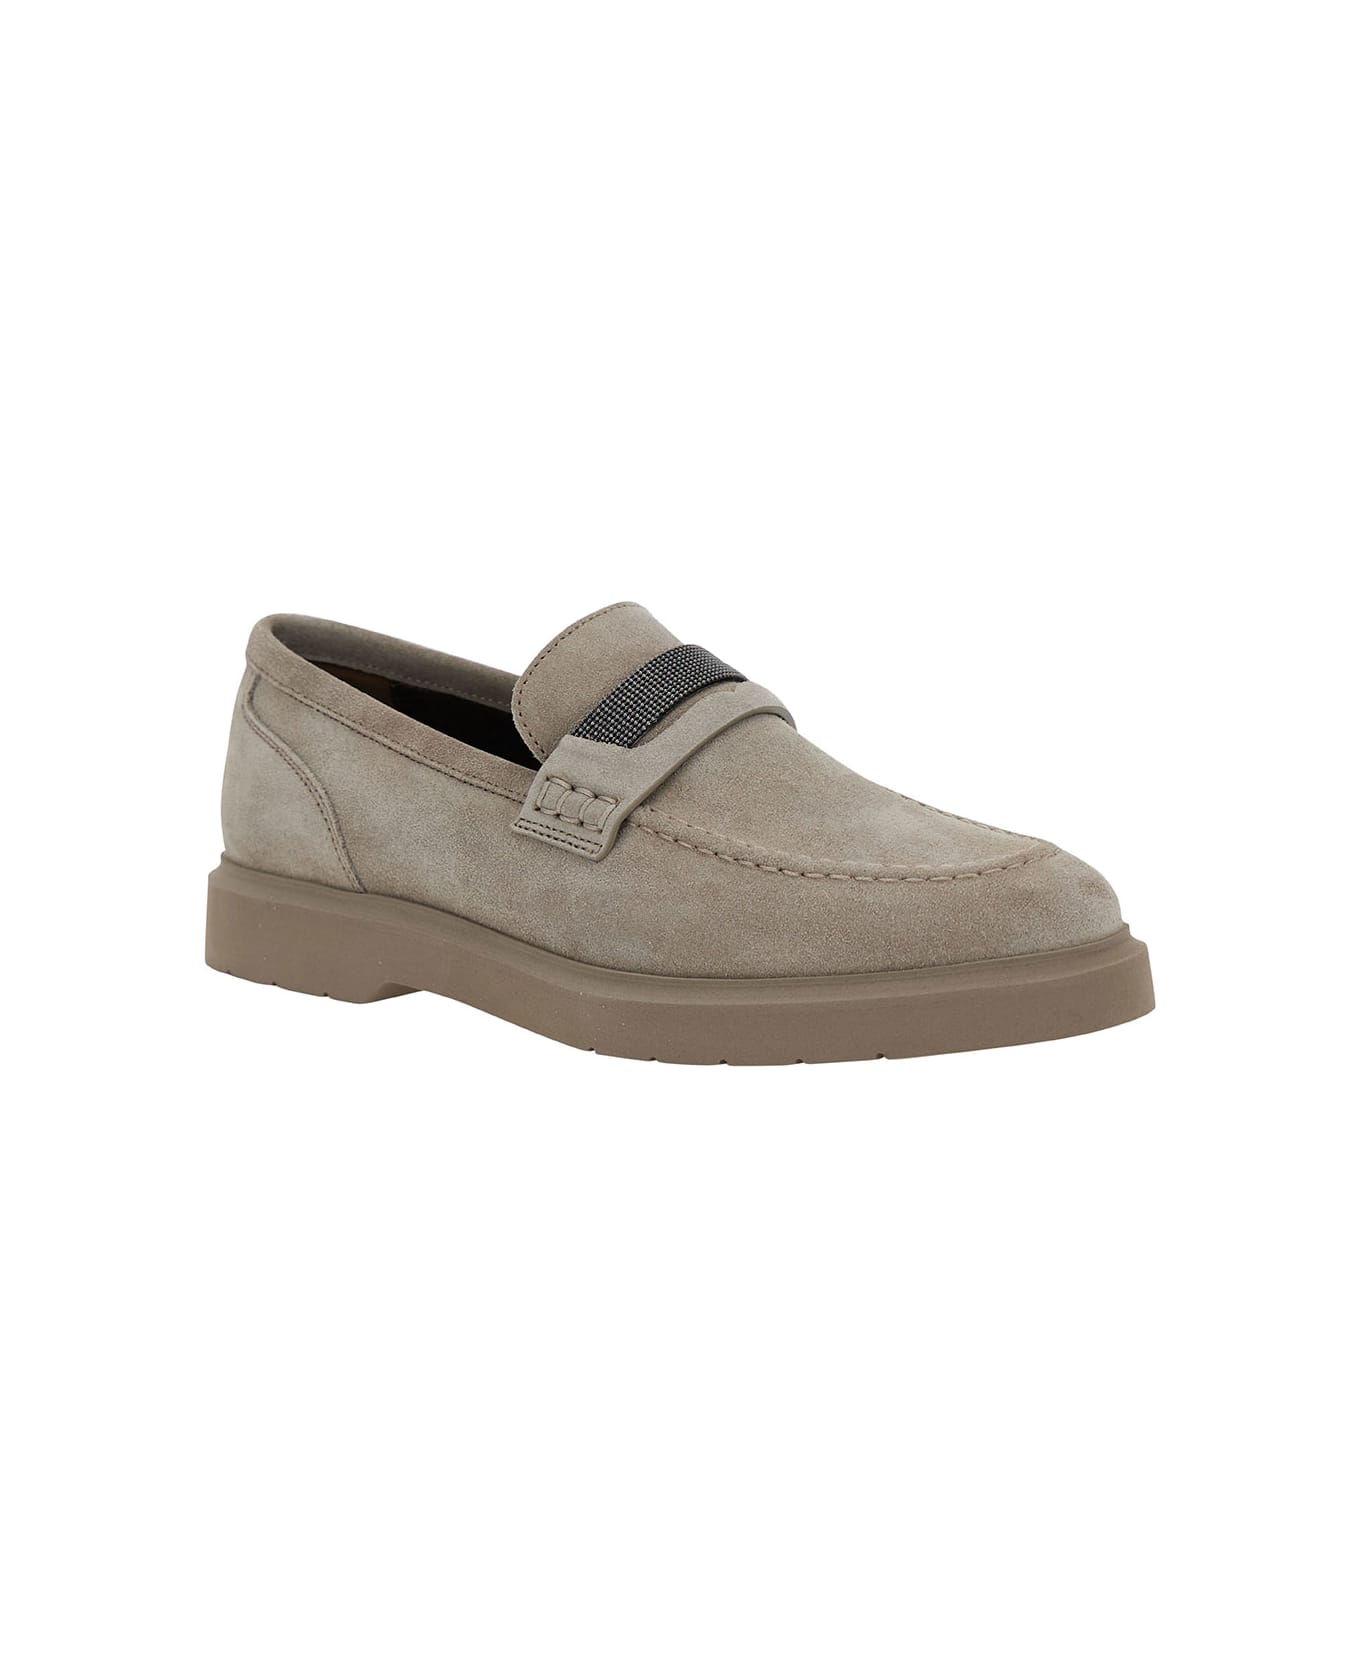 Brunello Cucinelli Grey Loafers With Monile Detail In Suede Woman - Grey フラットシューズ